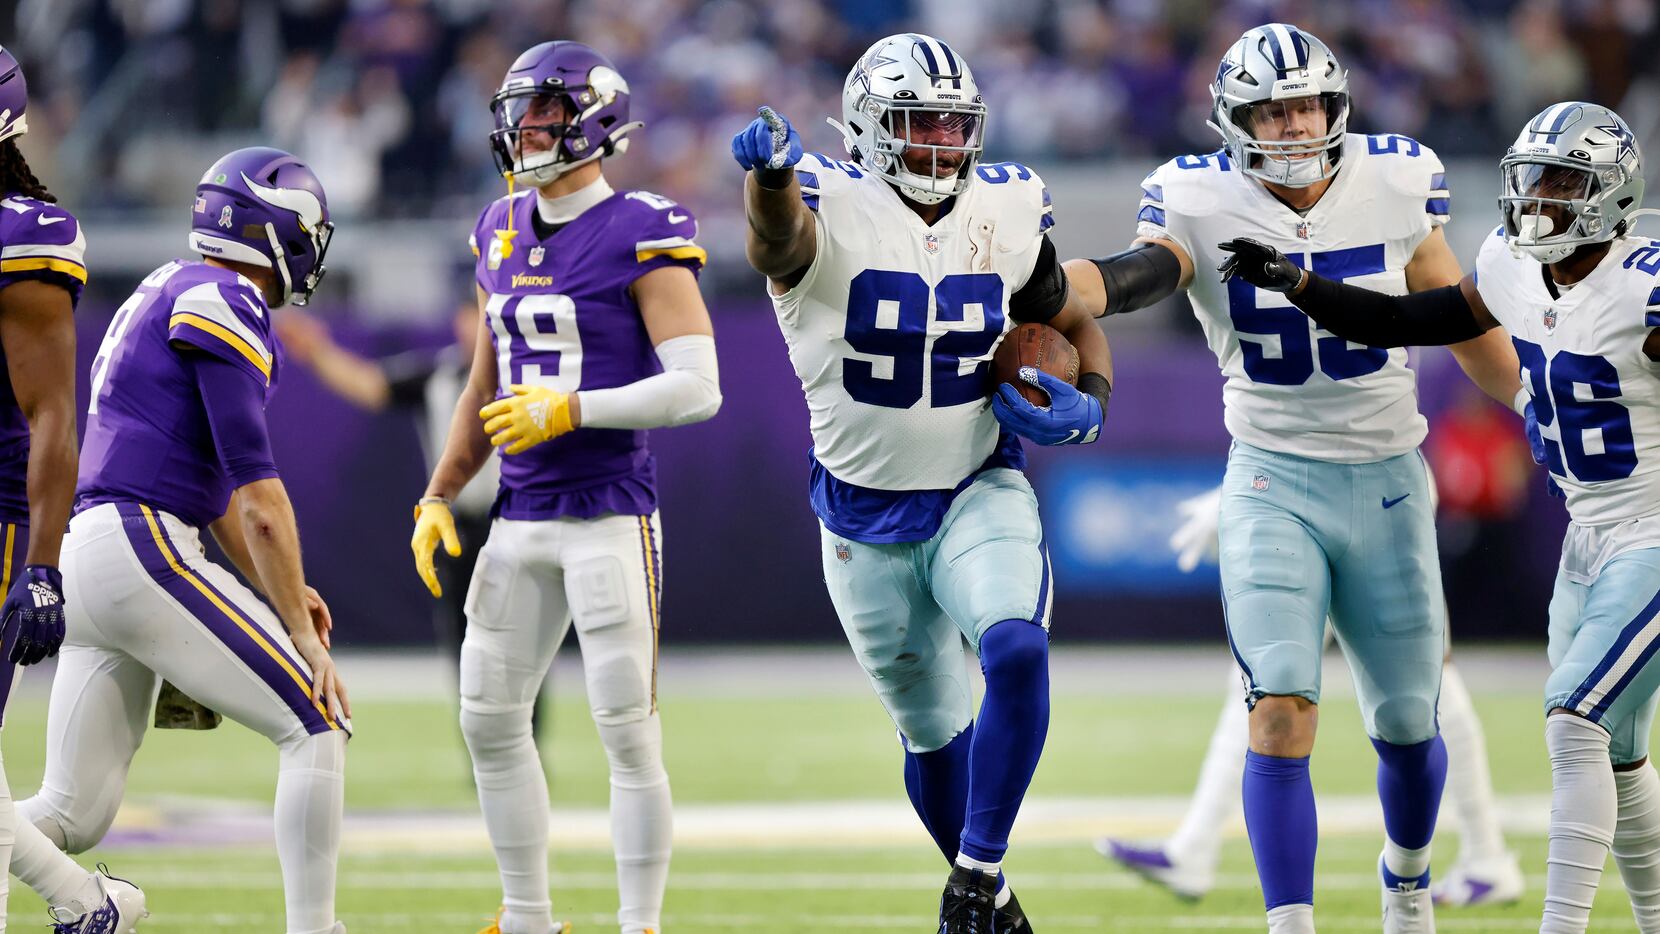 Check out these top photos from the Lions Week 14 win over the Vikings